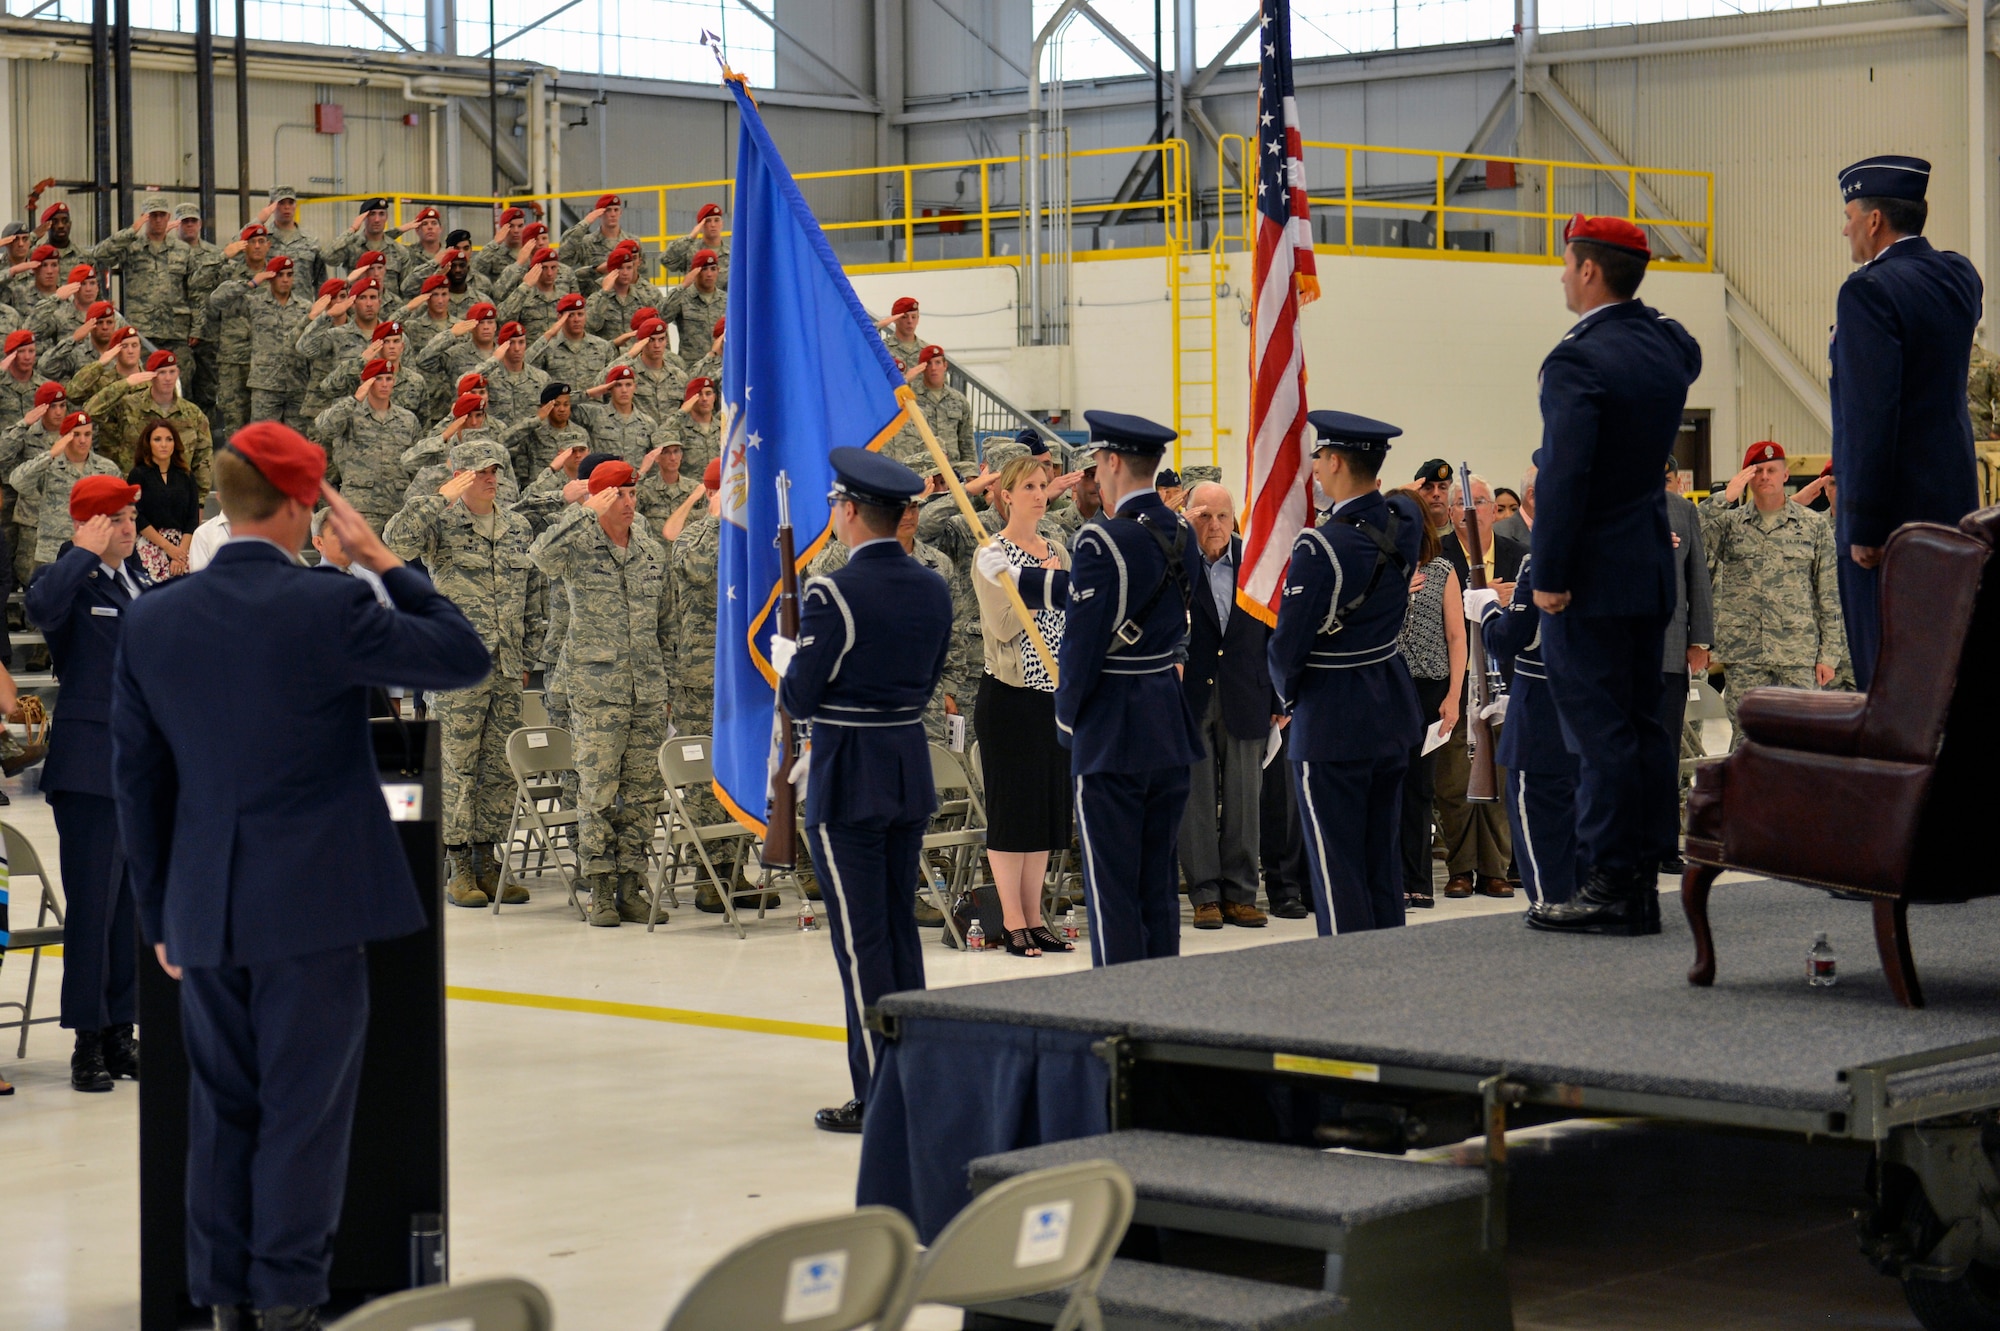 Members from the 22nd Special Tactics Squadron salute the presentation of the colors Aug. 18, 2014, during the 22nd STS awards ceremony at Joint Base Lewis-McChord, Wash. Airmen from the squadron and their families were accompanied by JBLM leadership and local community leaders to support their teammates being honored. (U.S. Air Force photo/Staff Sgt. Russ Jackson)